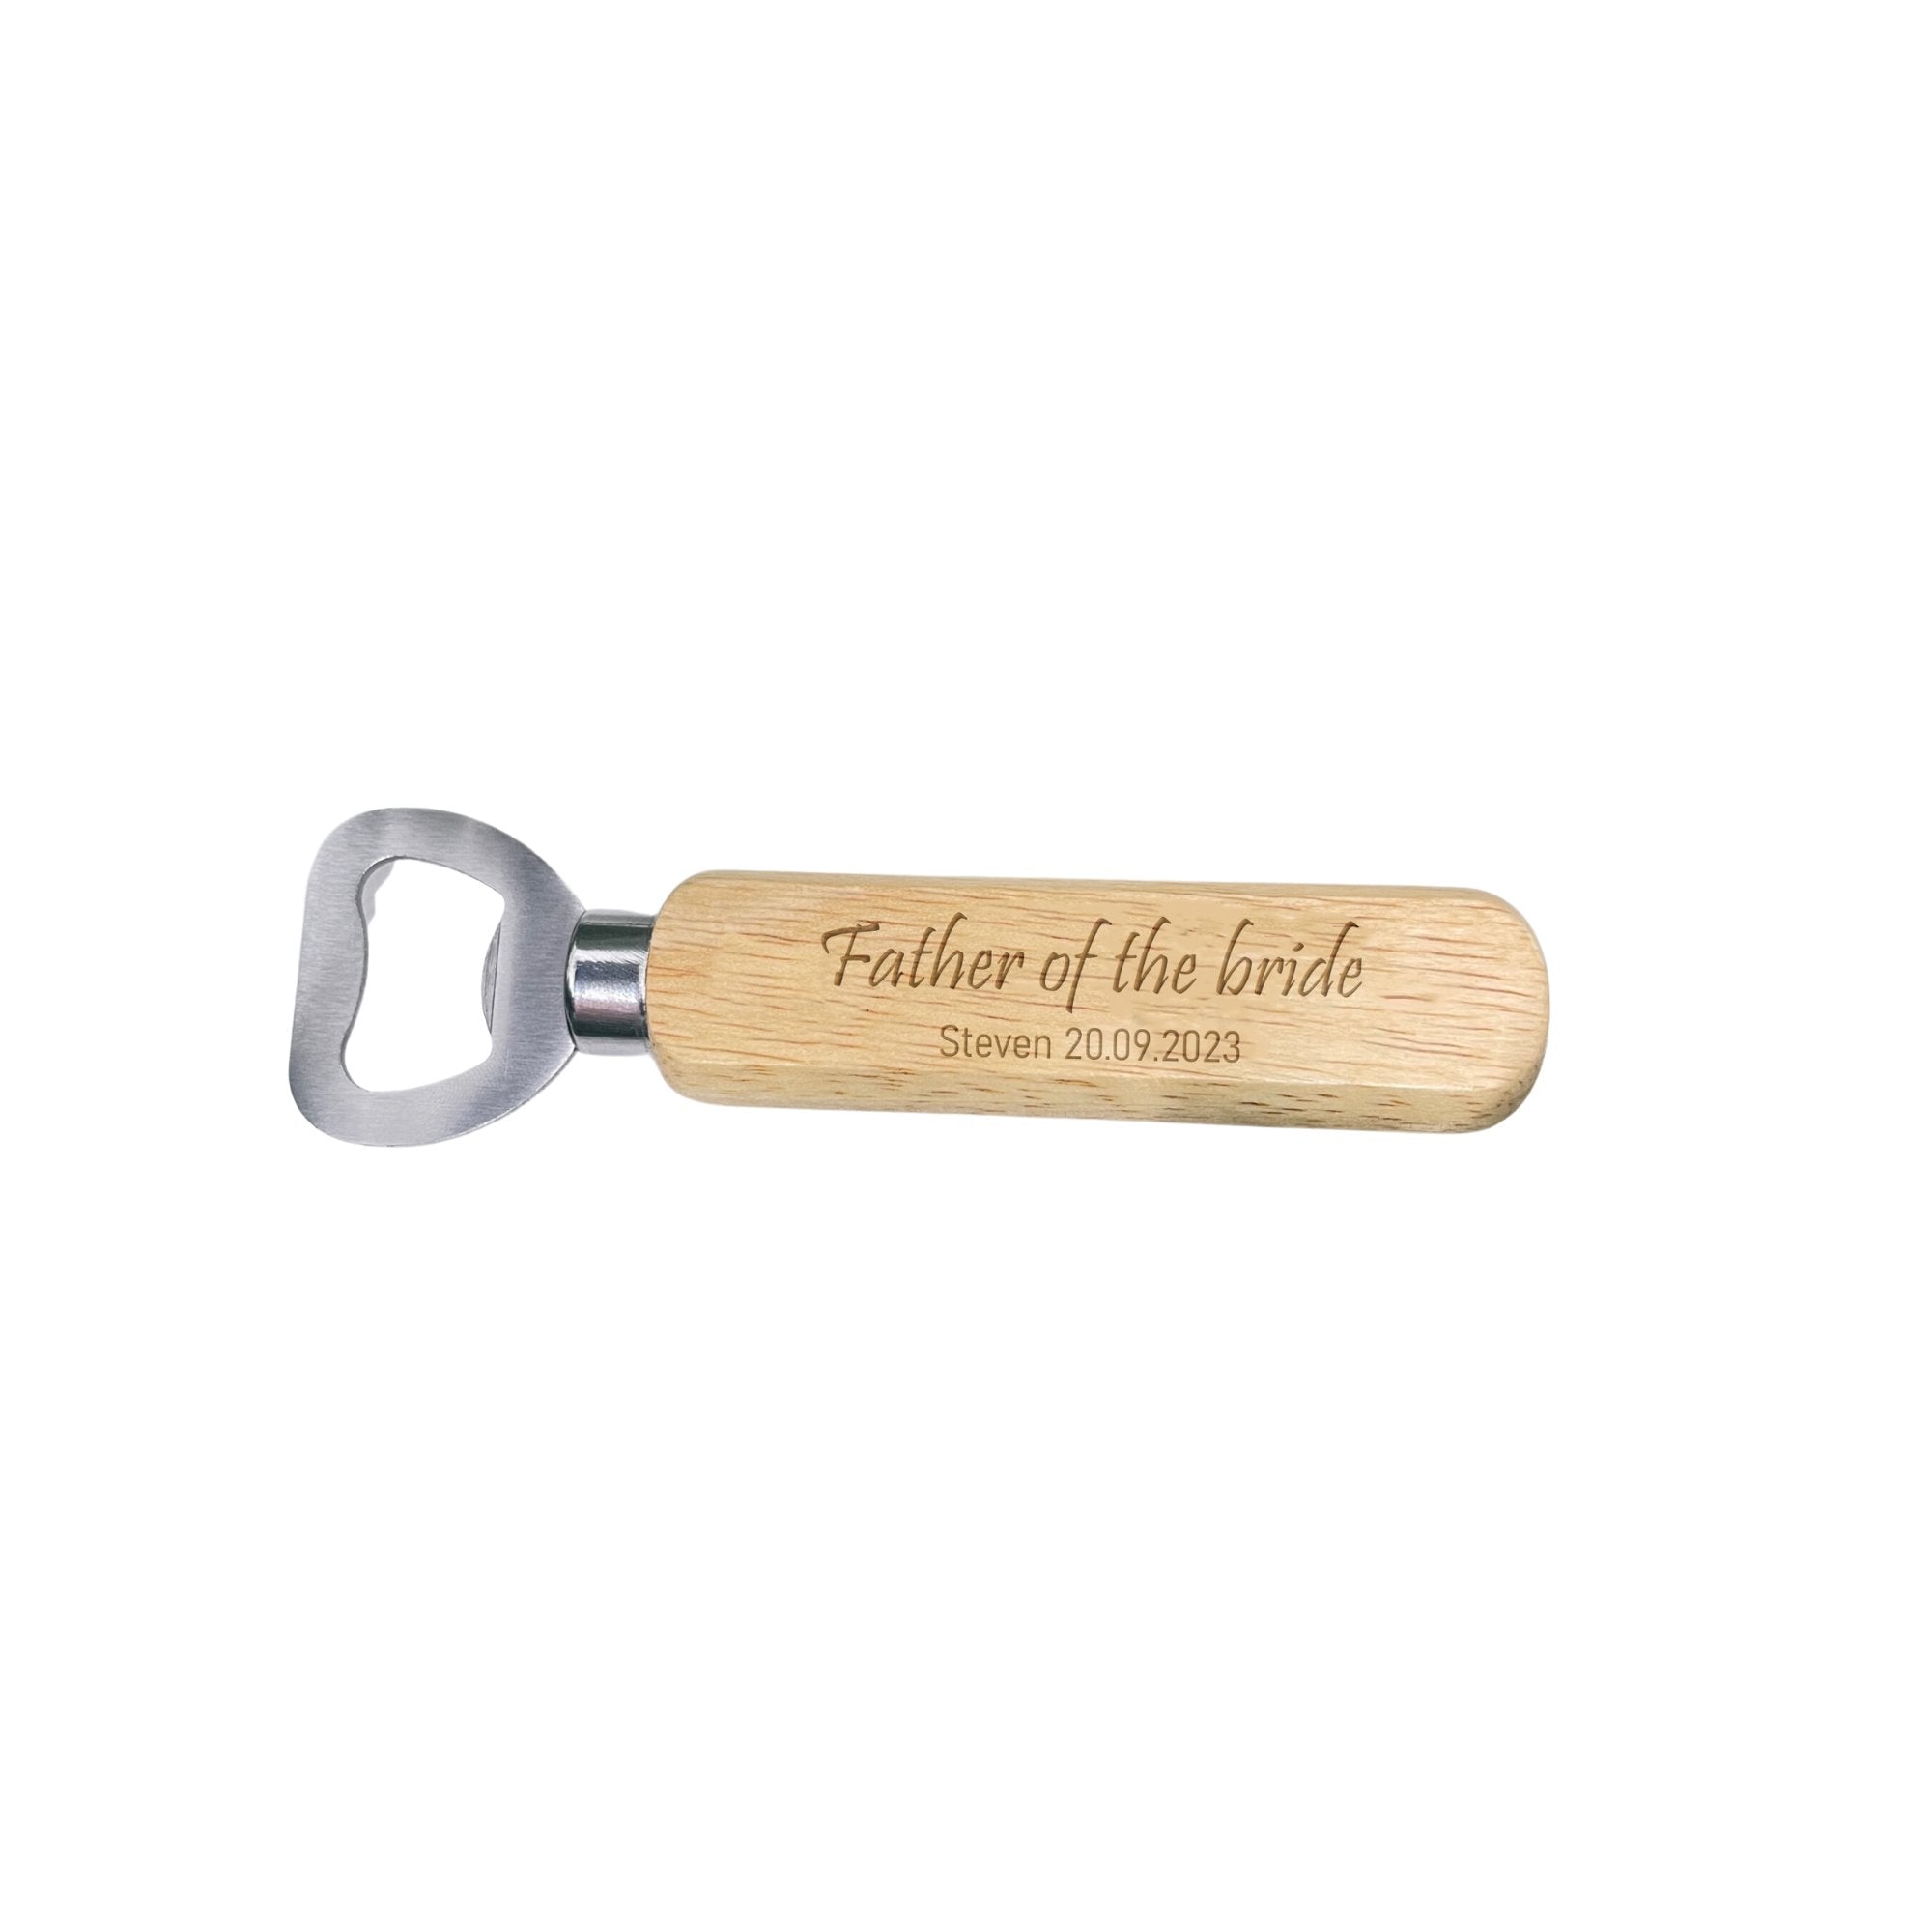 Custom laser-engraved wooden bottle openers featuring name, title, and wedding date.